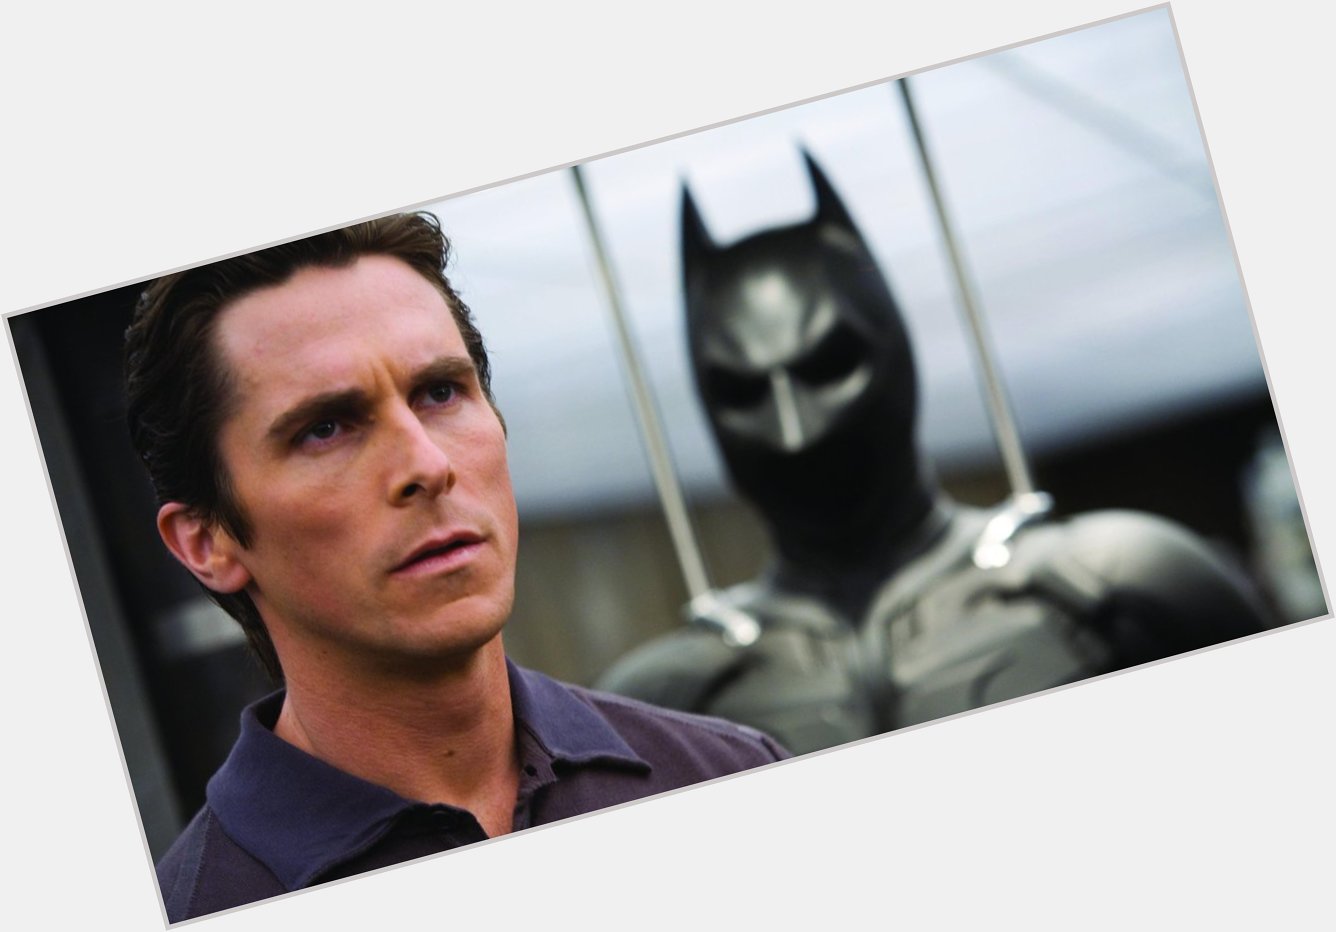 Happy Birthday to the One and Only Christian Bale aka The Dark Knight. 